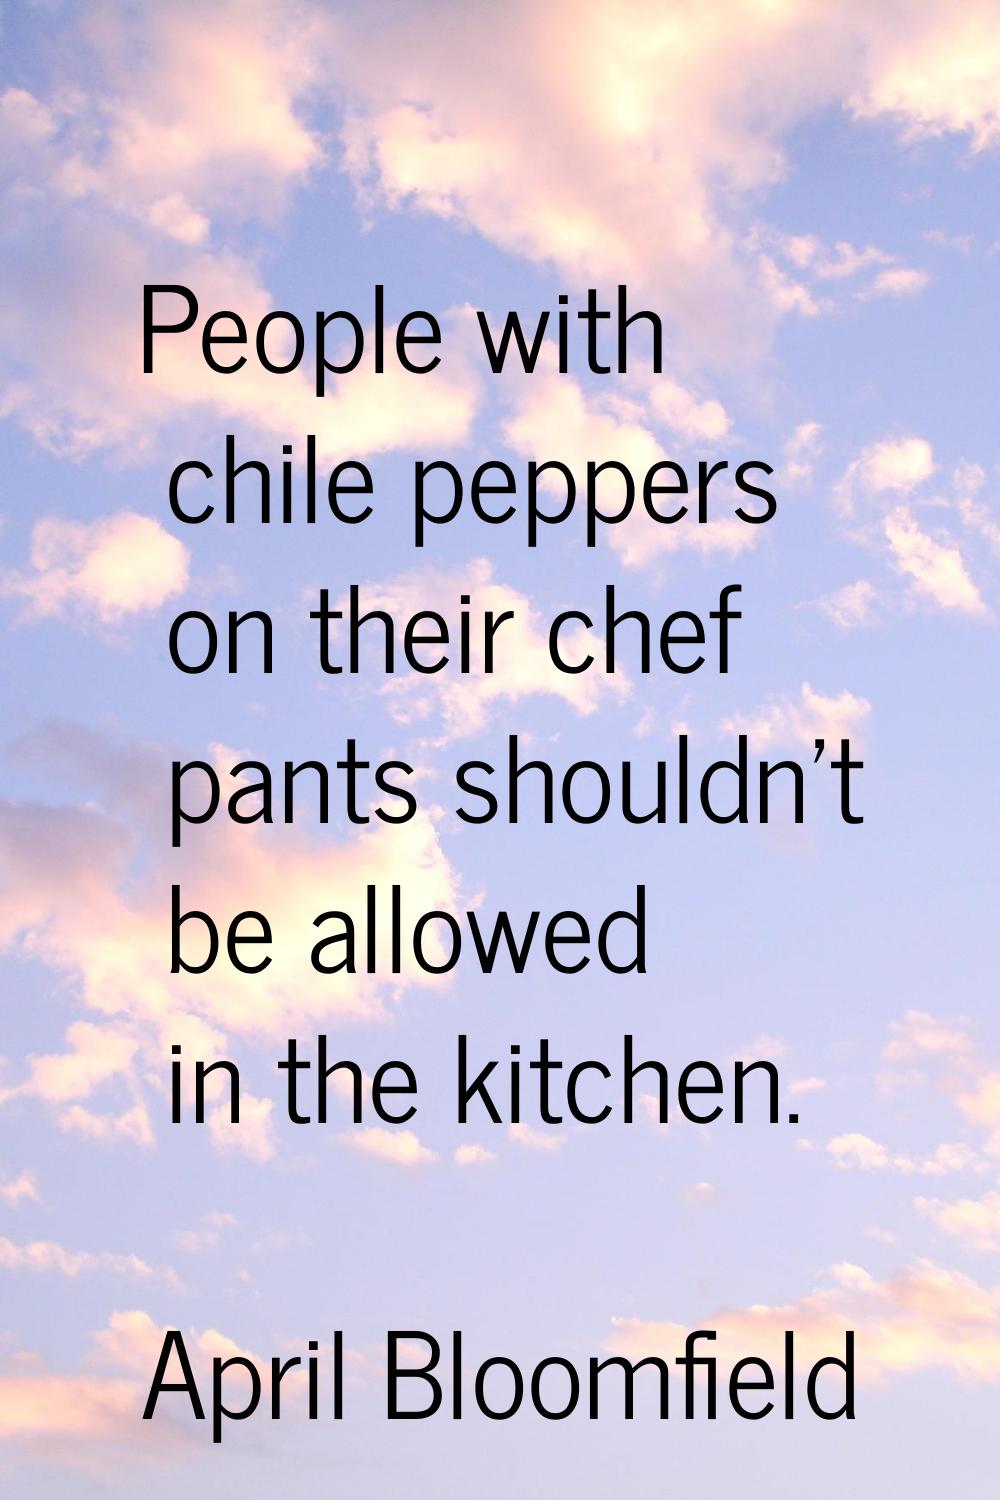 People with chile peppers on their chef pants shouldn't be allowed in the kitchen.